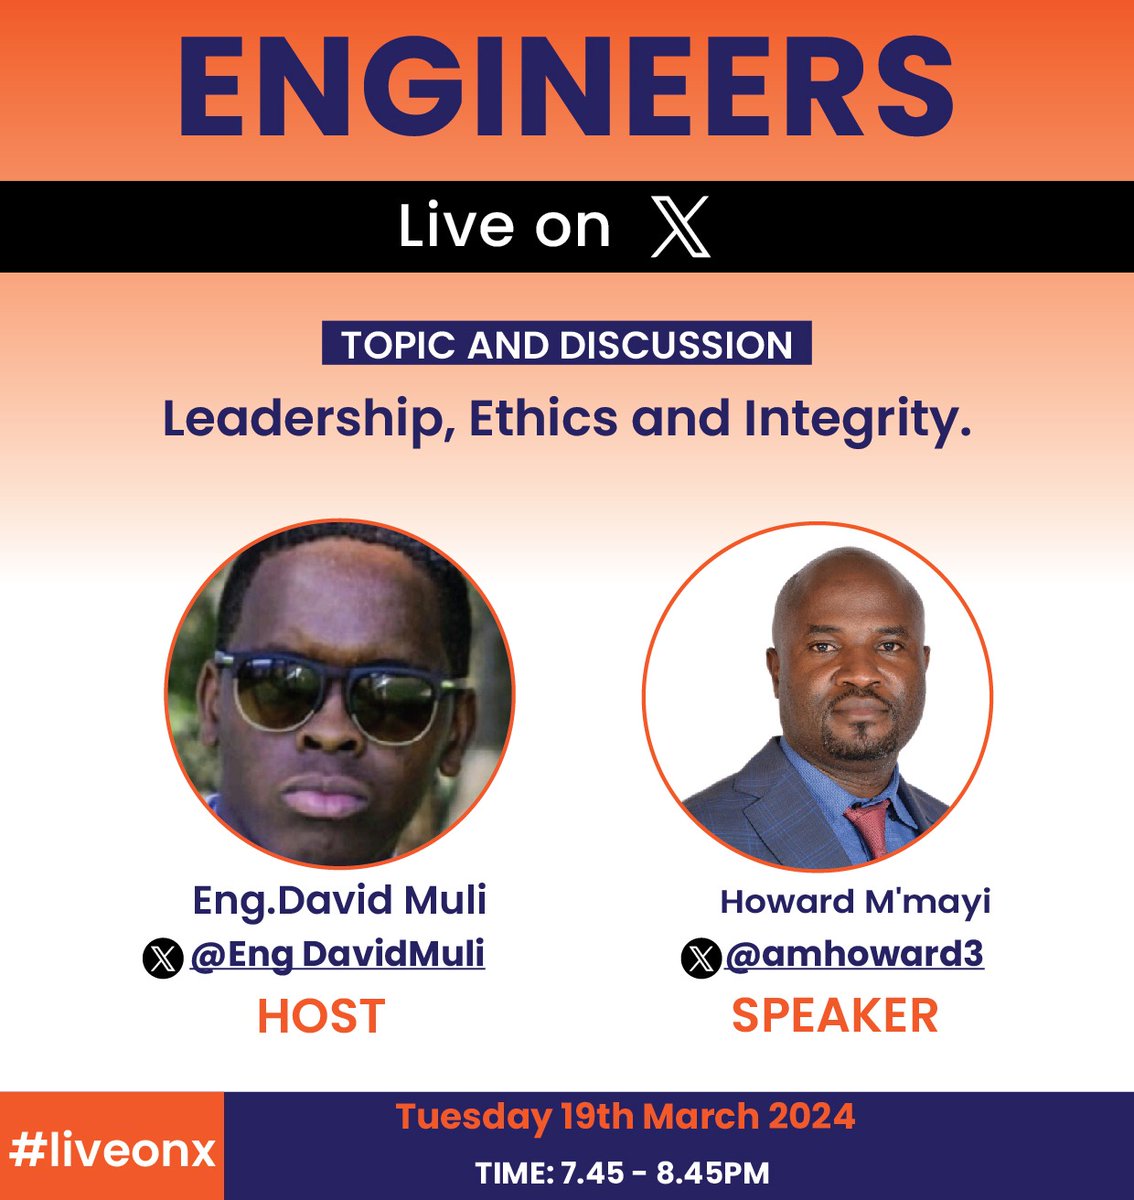 With @TheIEK elections fast approaching, we are privileged to host the upcoming Engineers #LiveOnx discussing the leadership, ethics and integrity topics. Tune in to the Engineers #LiveOnX as Eng. @amhoward3 breaks it down for you. Set your reminder here x.com/i/spaces/1OyJA….